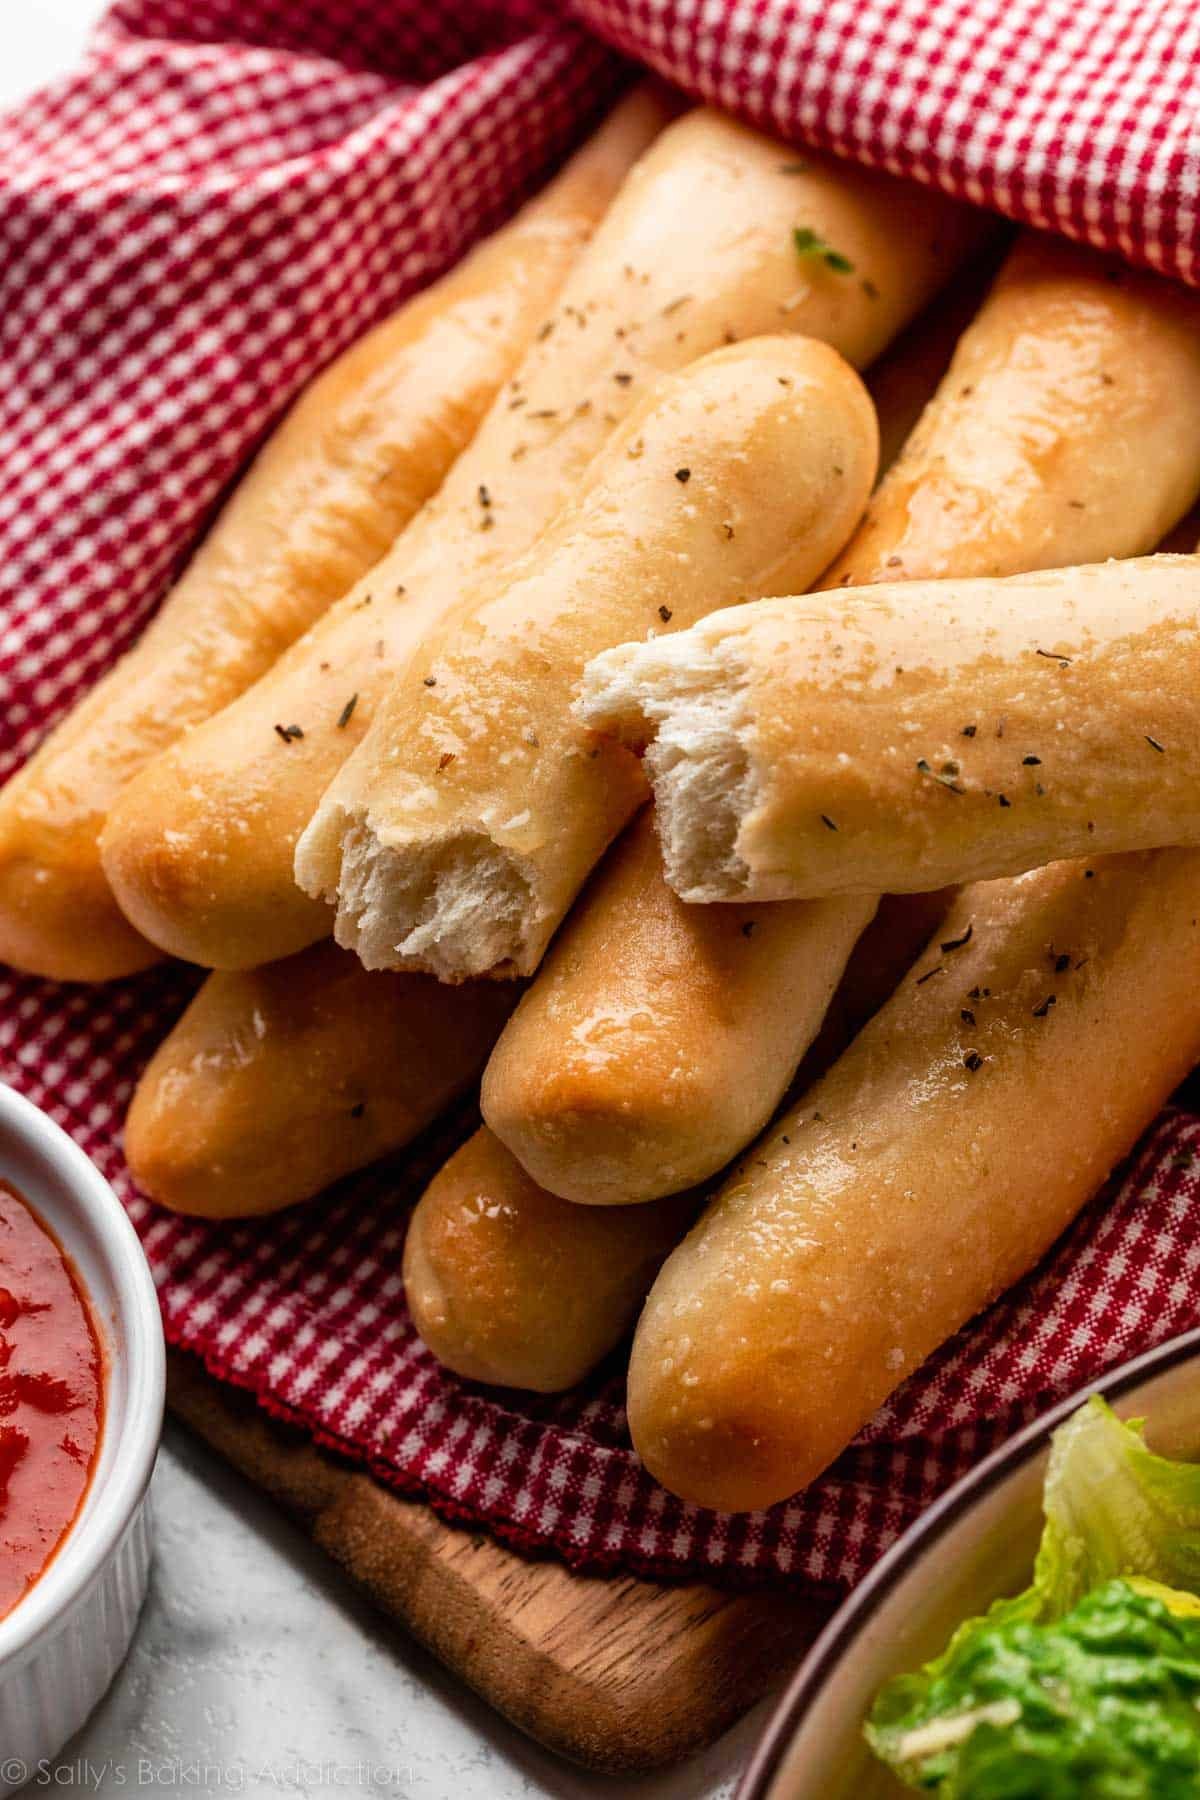 breadstick broken in half on top of other breadsticks wrapped in red checkered linen.